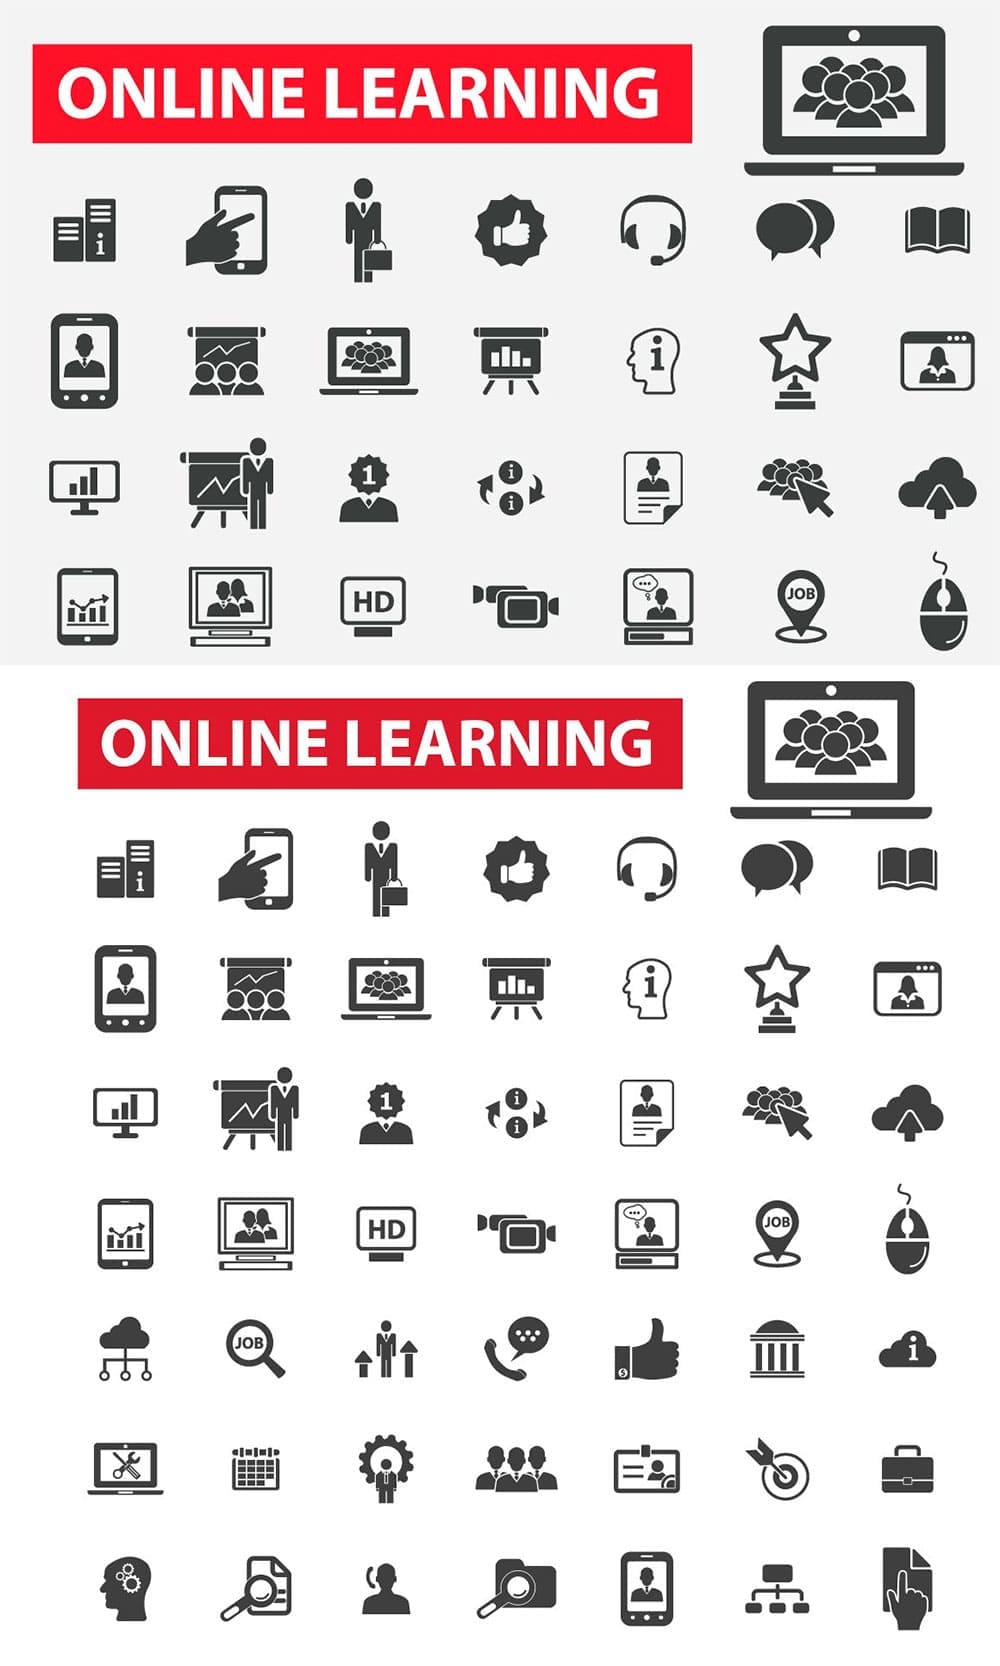 49 online learning icons, picture for pinterest.